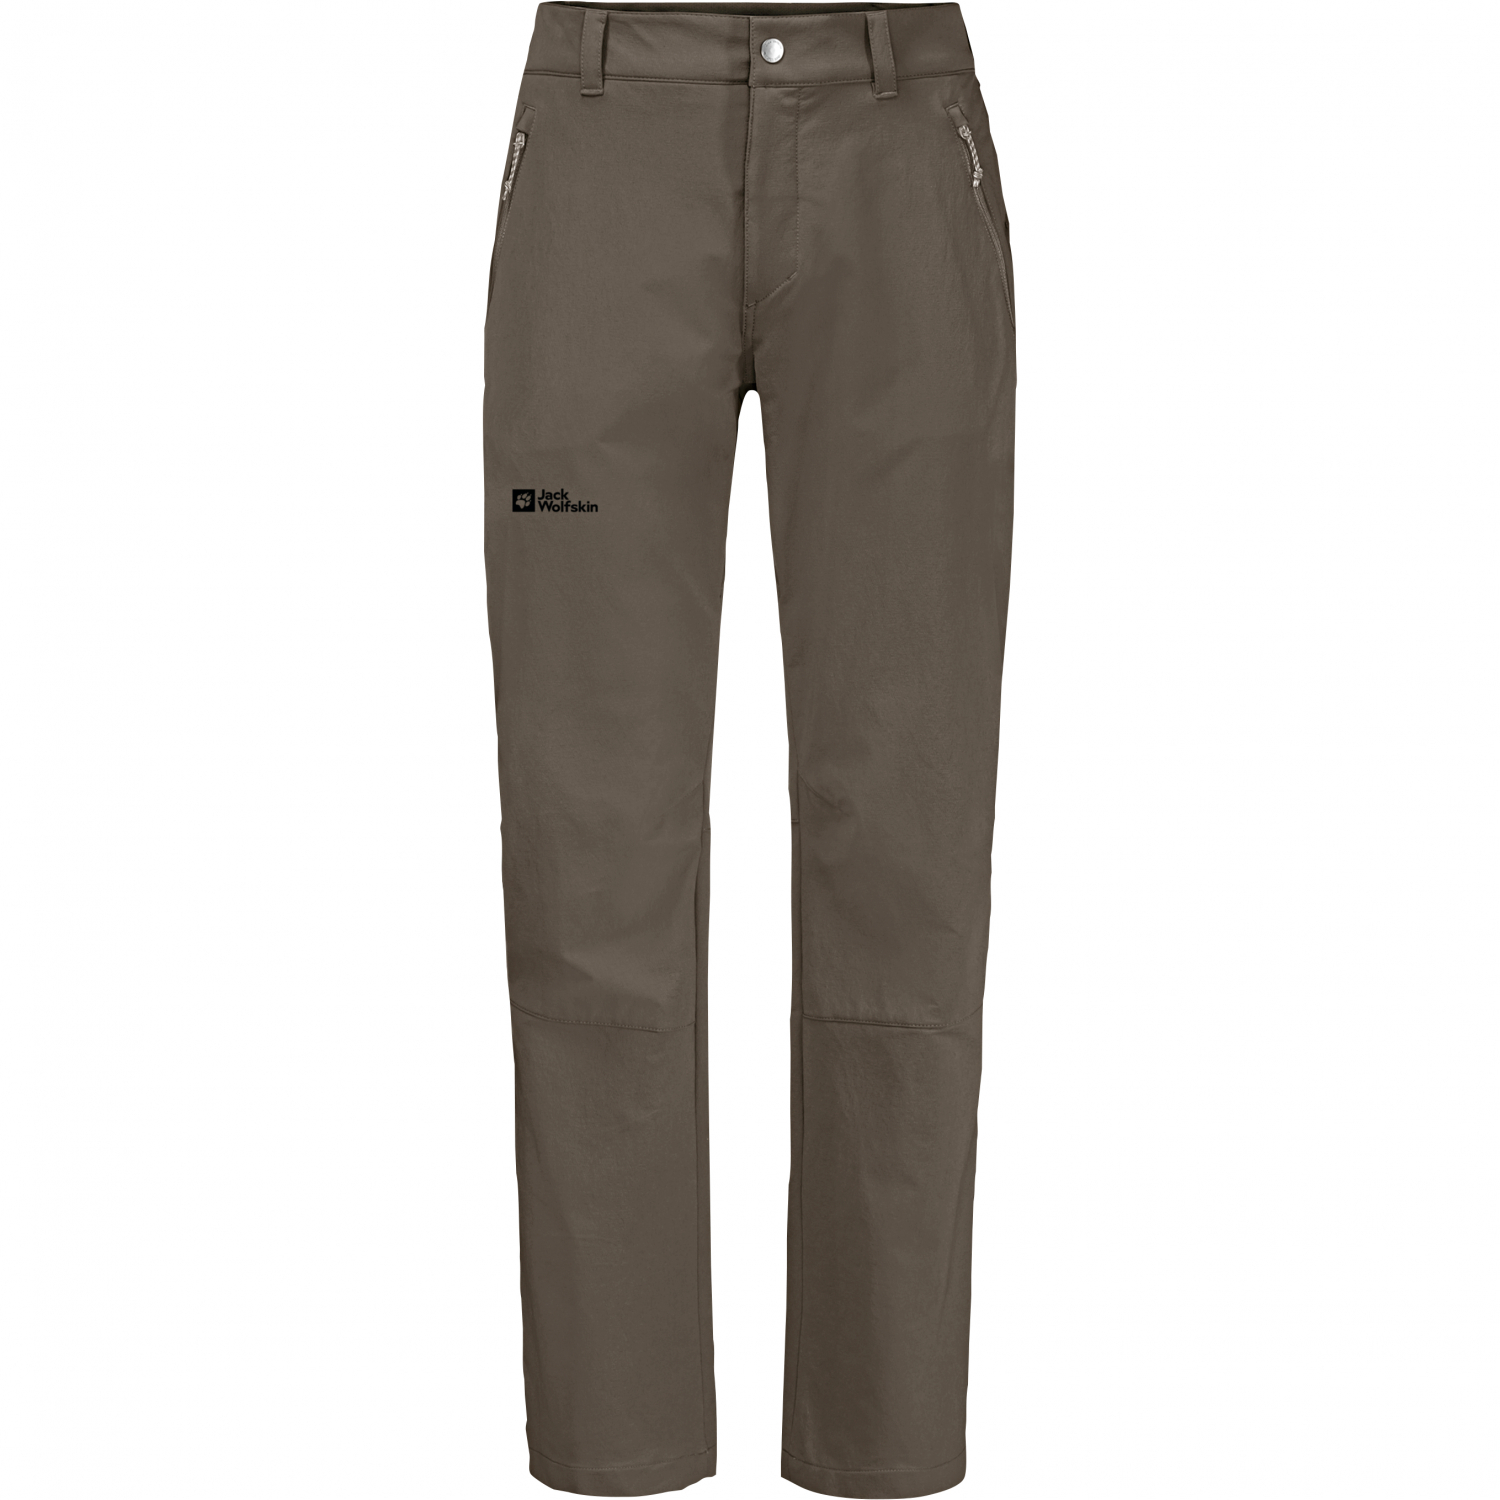 Jack Wolfskin Mens Activate XT hiking trousers at low prices